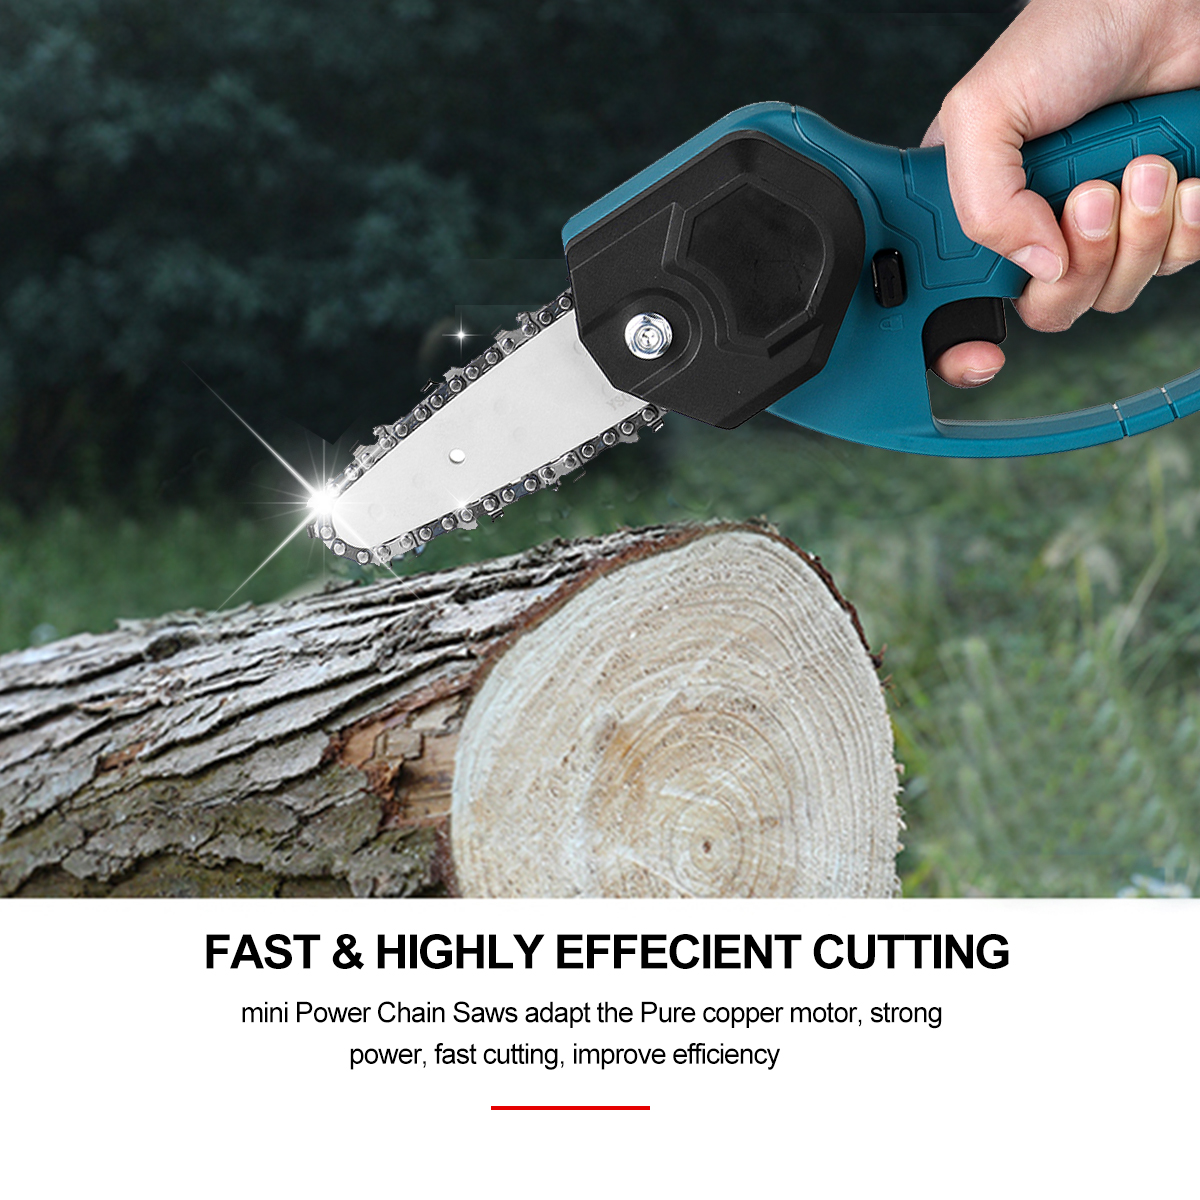 4-Inch-24V-Cordless-Electric-Chainsaw-Protable-Tree-Branch-Wood-Cutting-Saw-W-01pc2pcs-Batteries-1803311-7